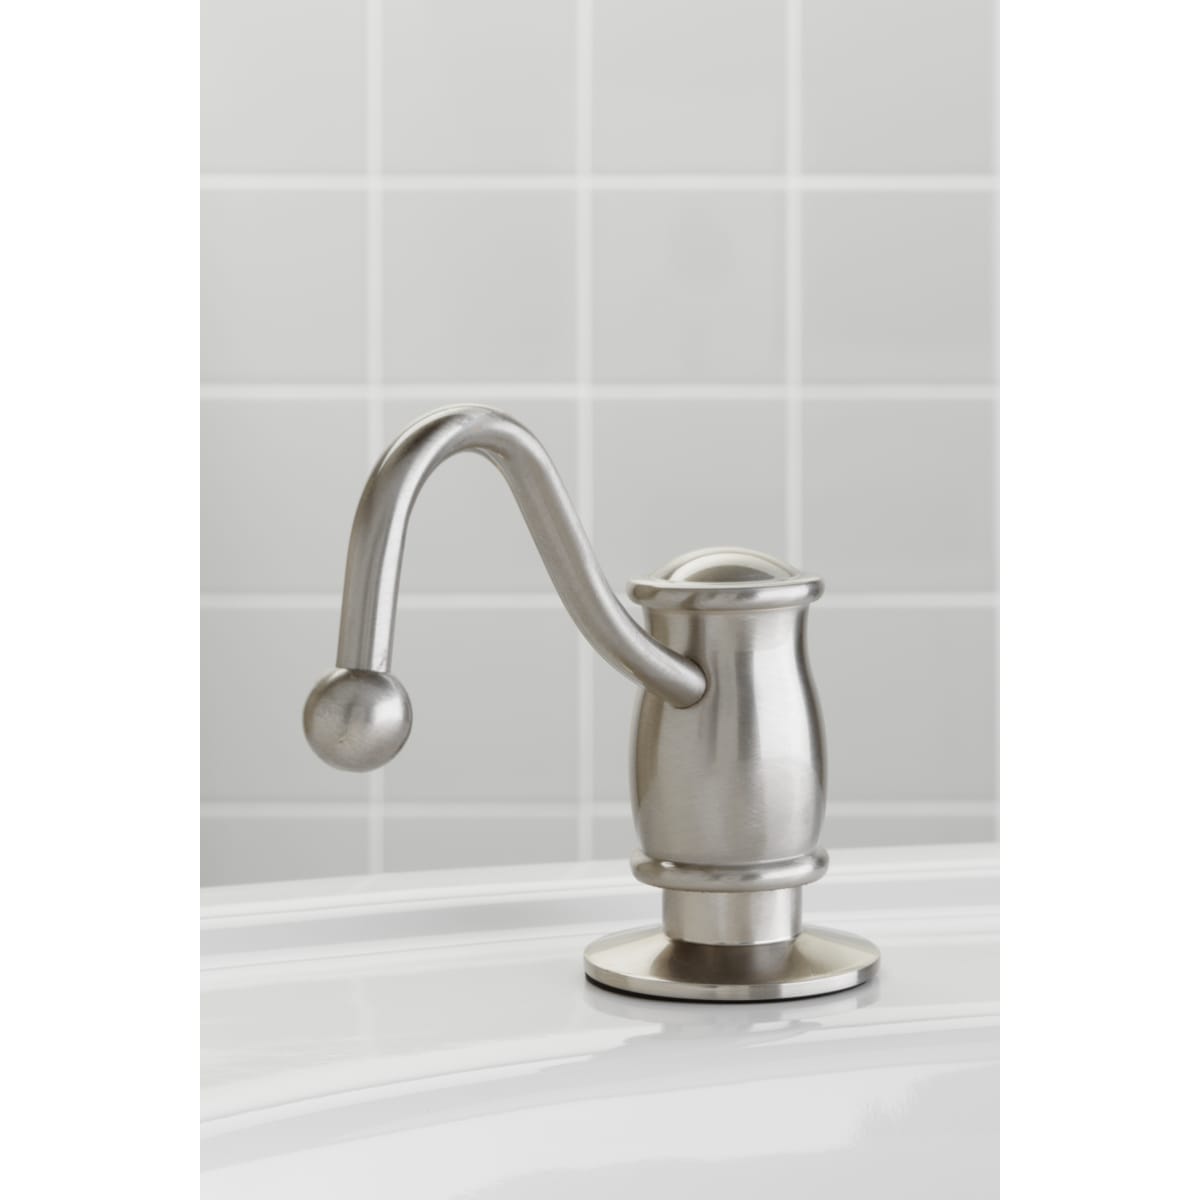 Mico 7810 Sn Satin Nickel Soap Lotion Dispenser From The Soap